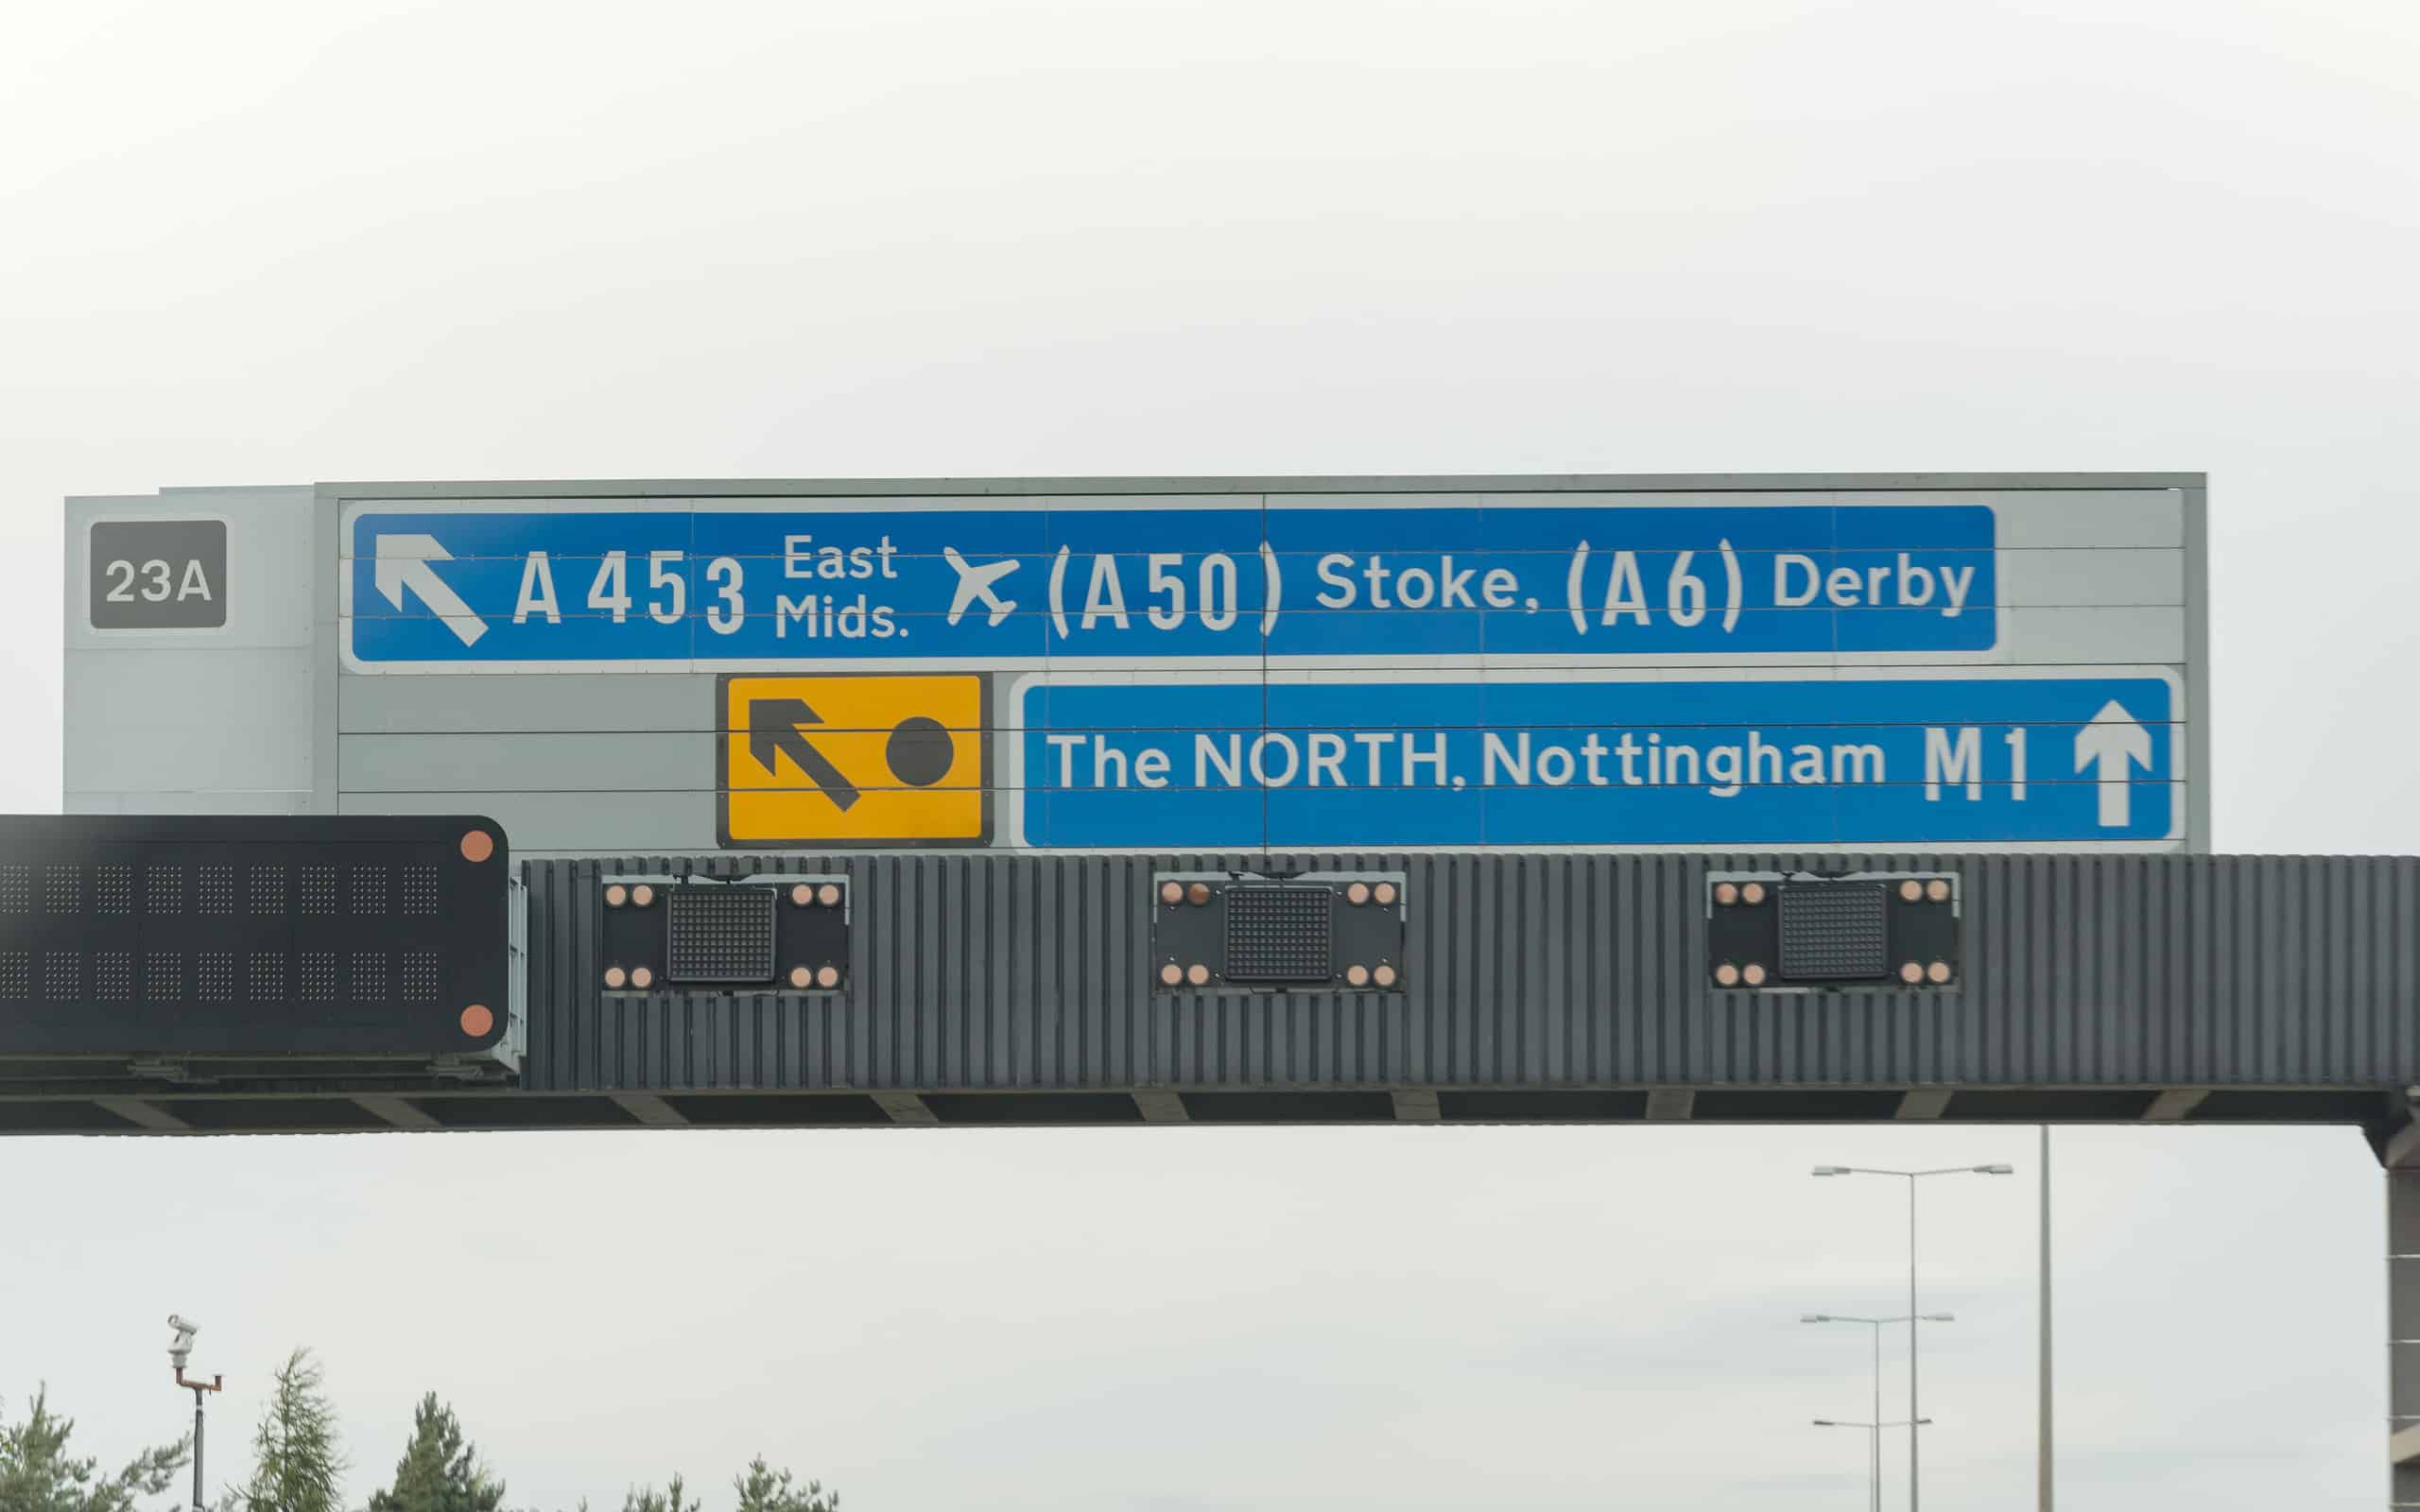 Sign on Motorway in England